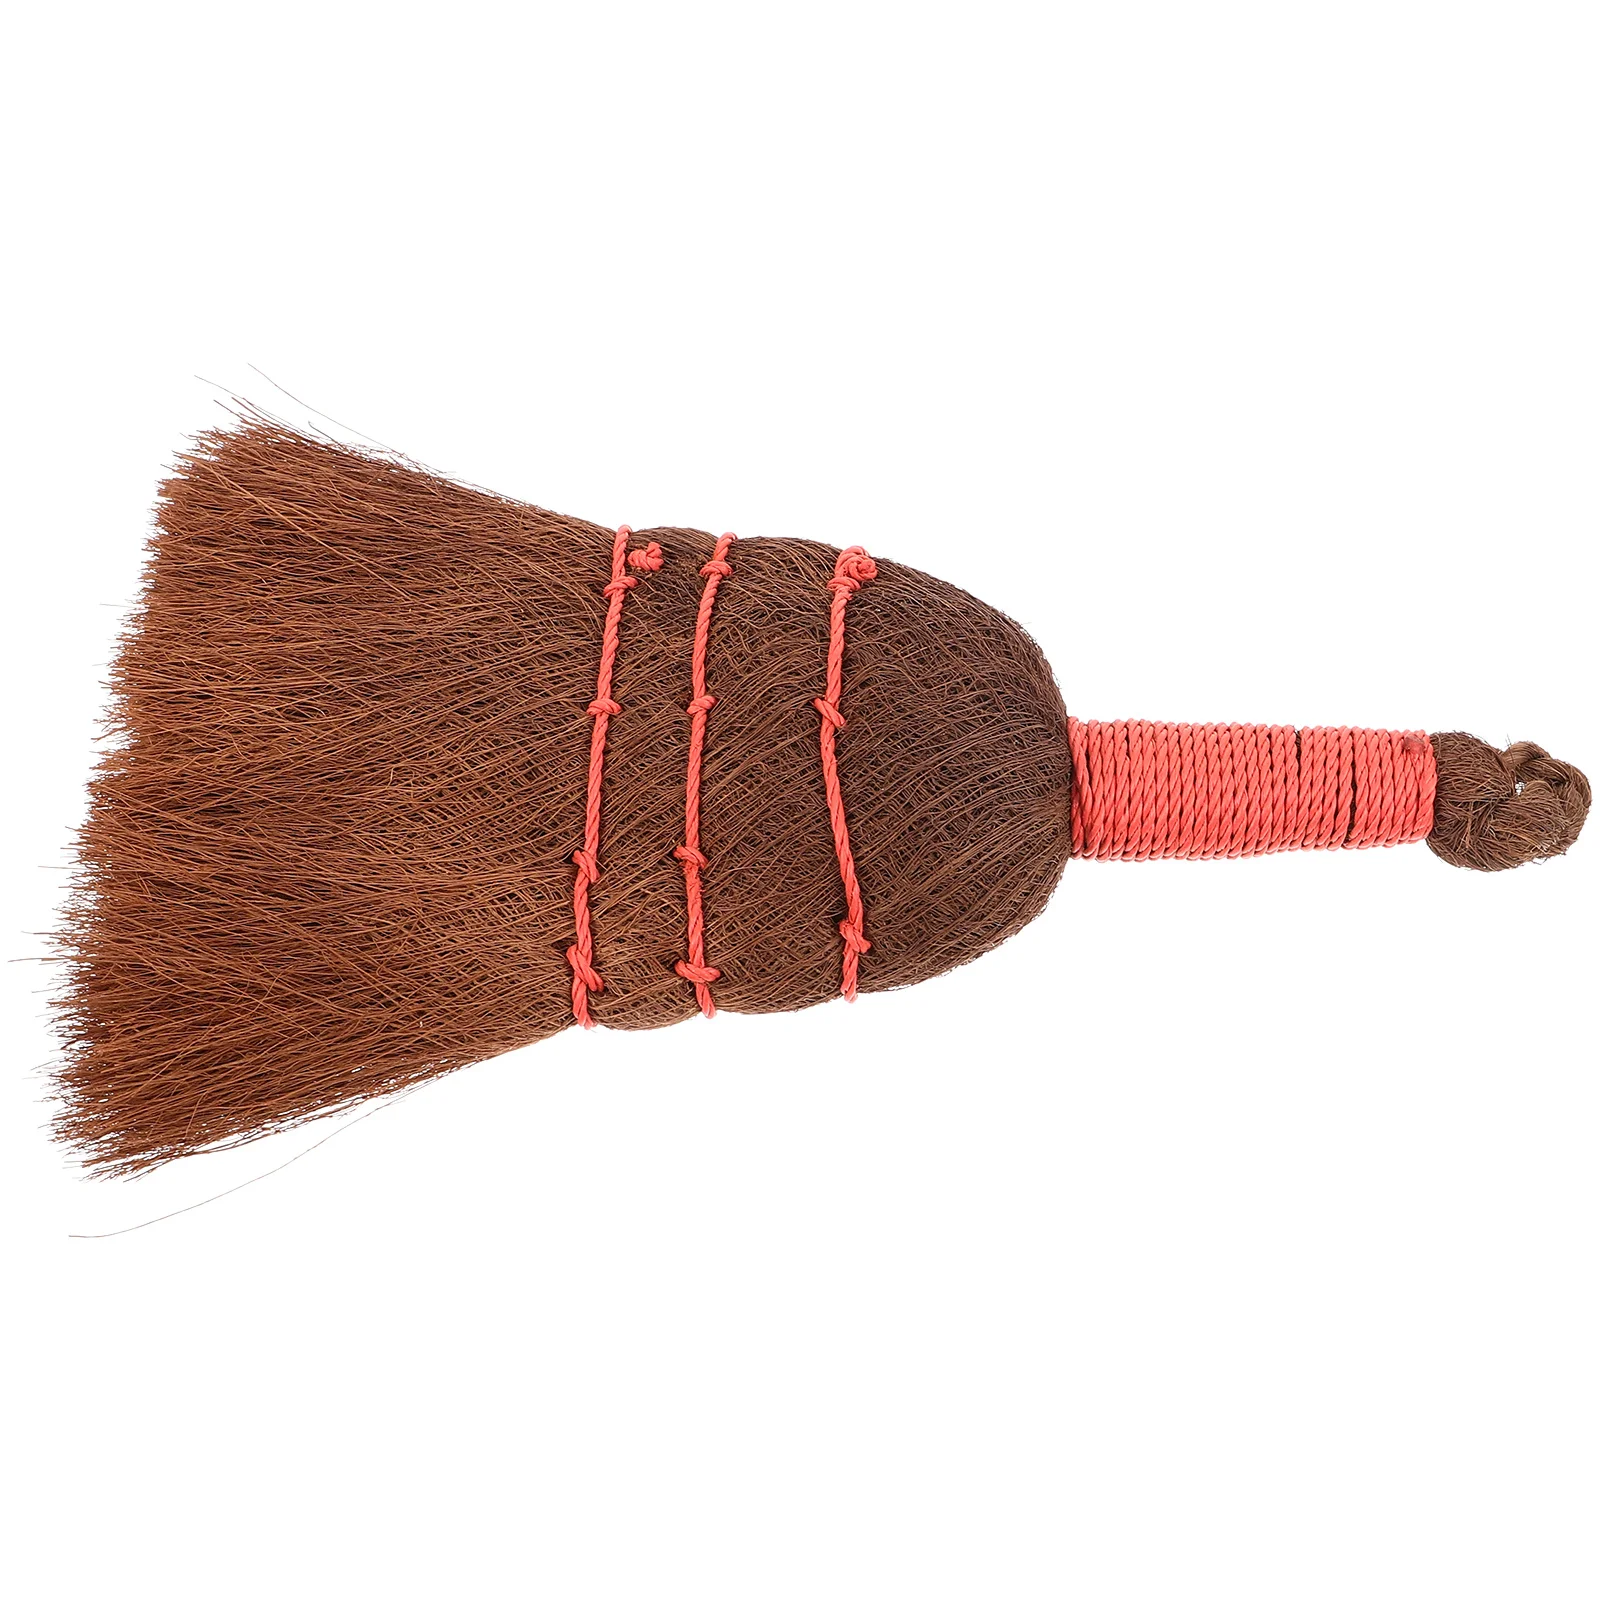 

Desk Palm Dust Brush Bamboo Handle Broom Small Cleaning Broom Household Broom